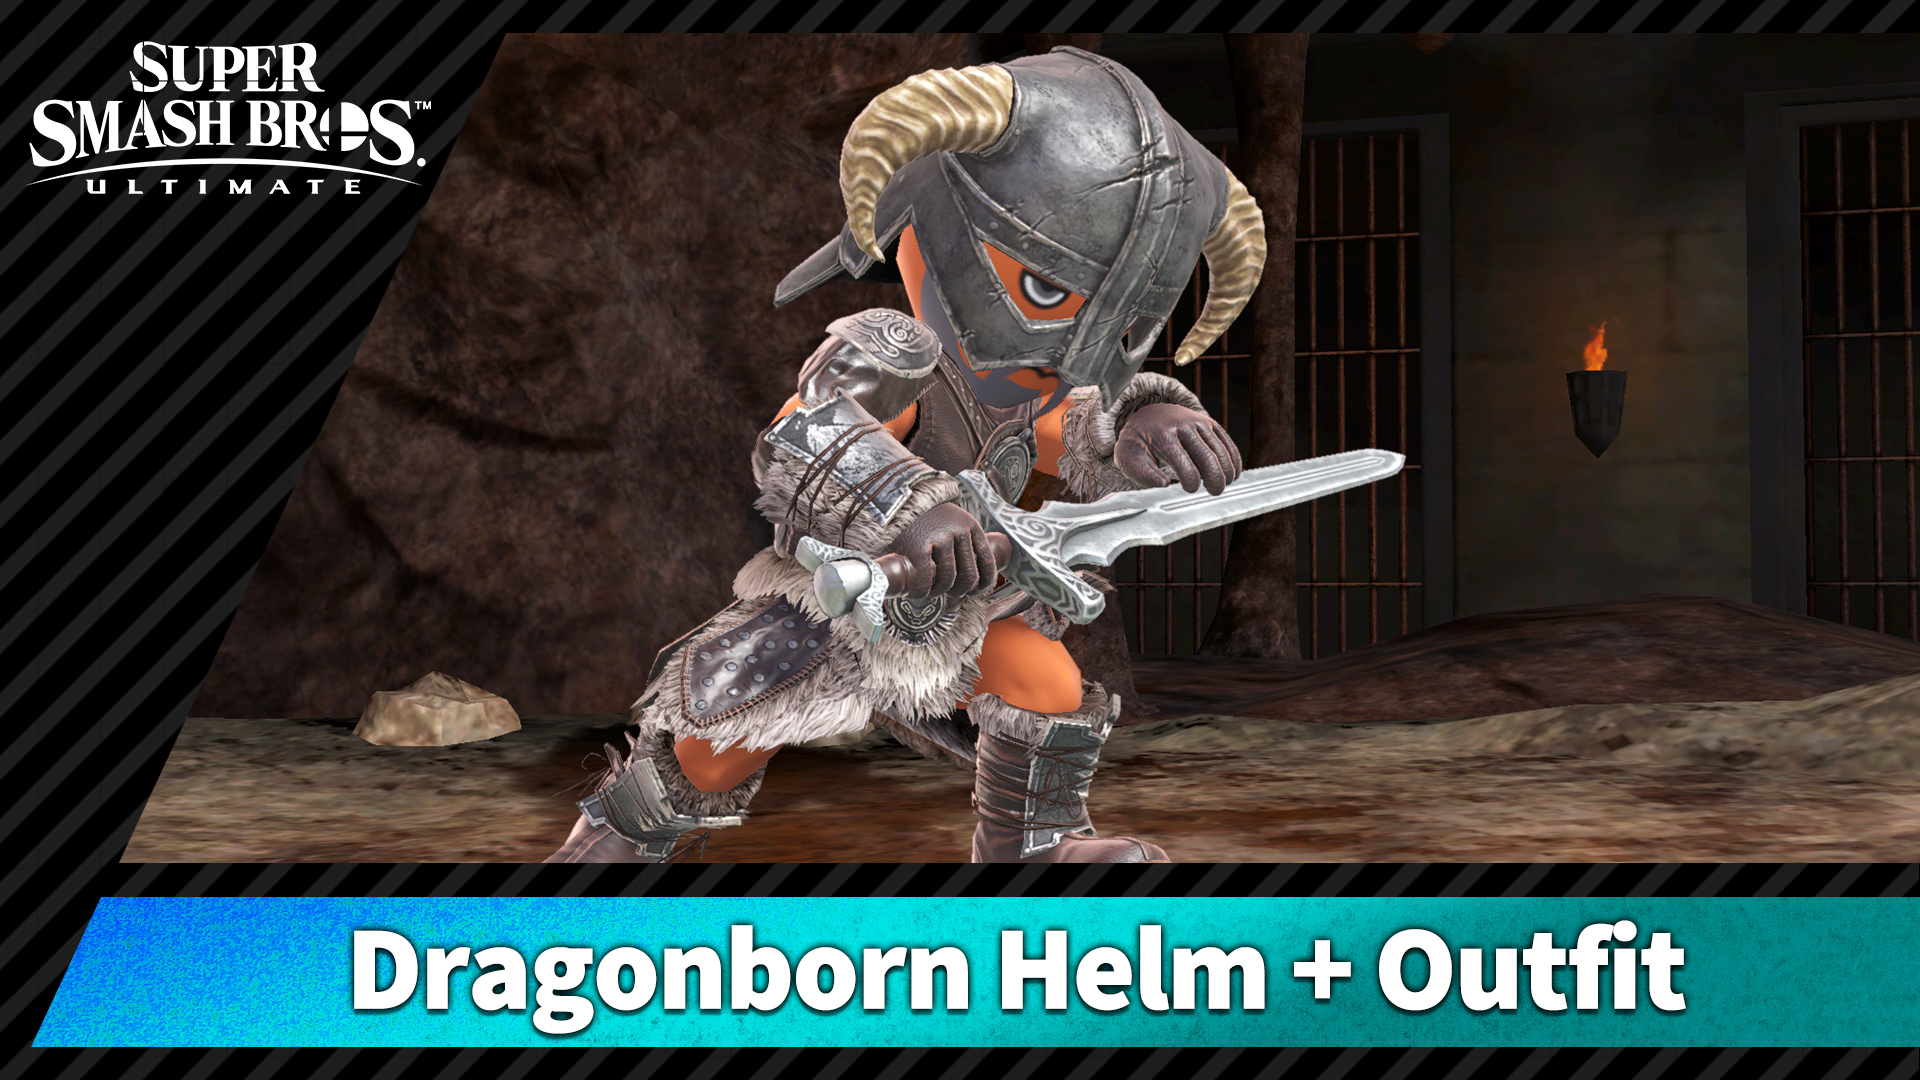 Dragonborn Helm + Outfit